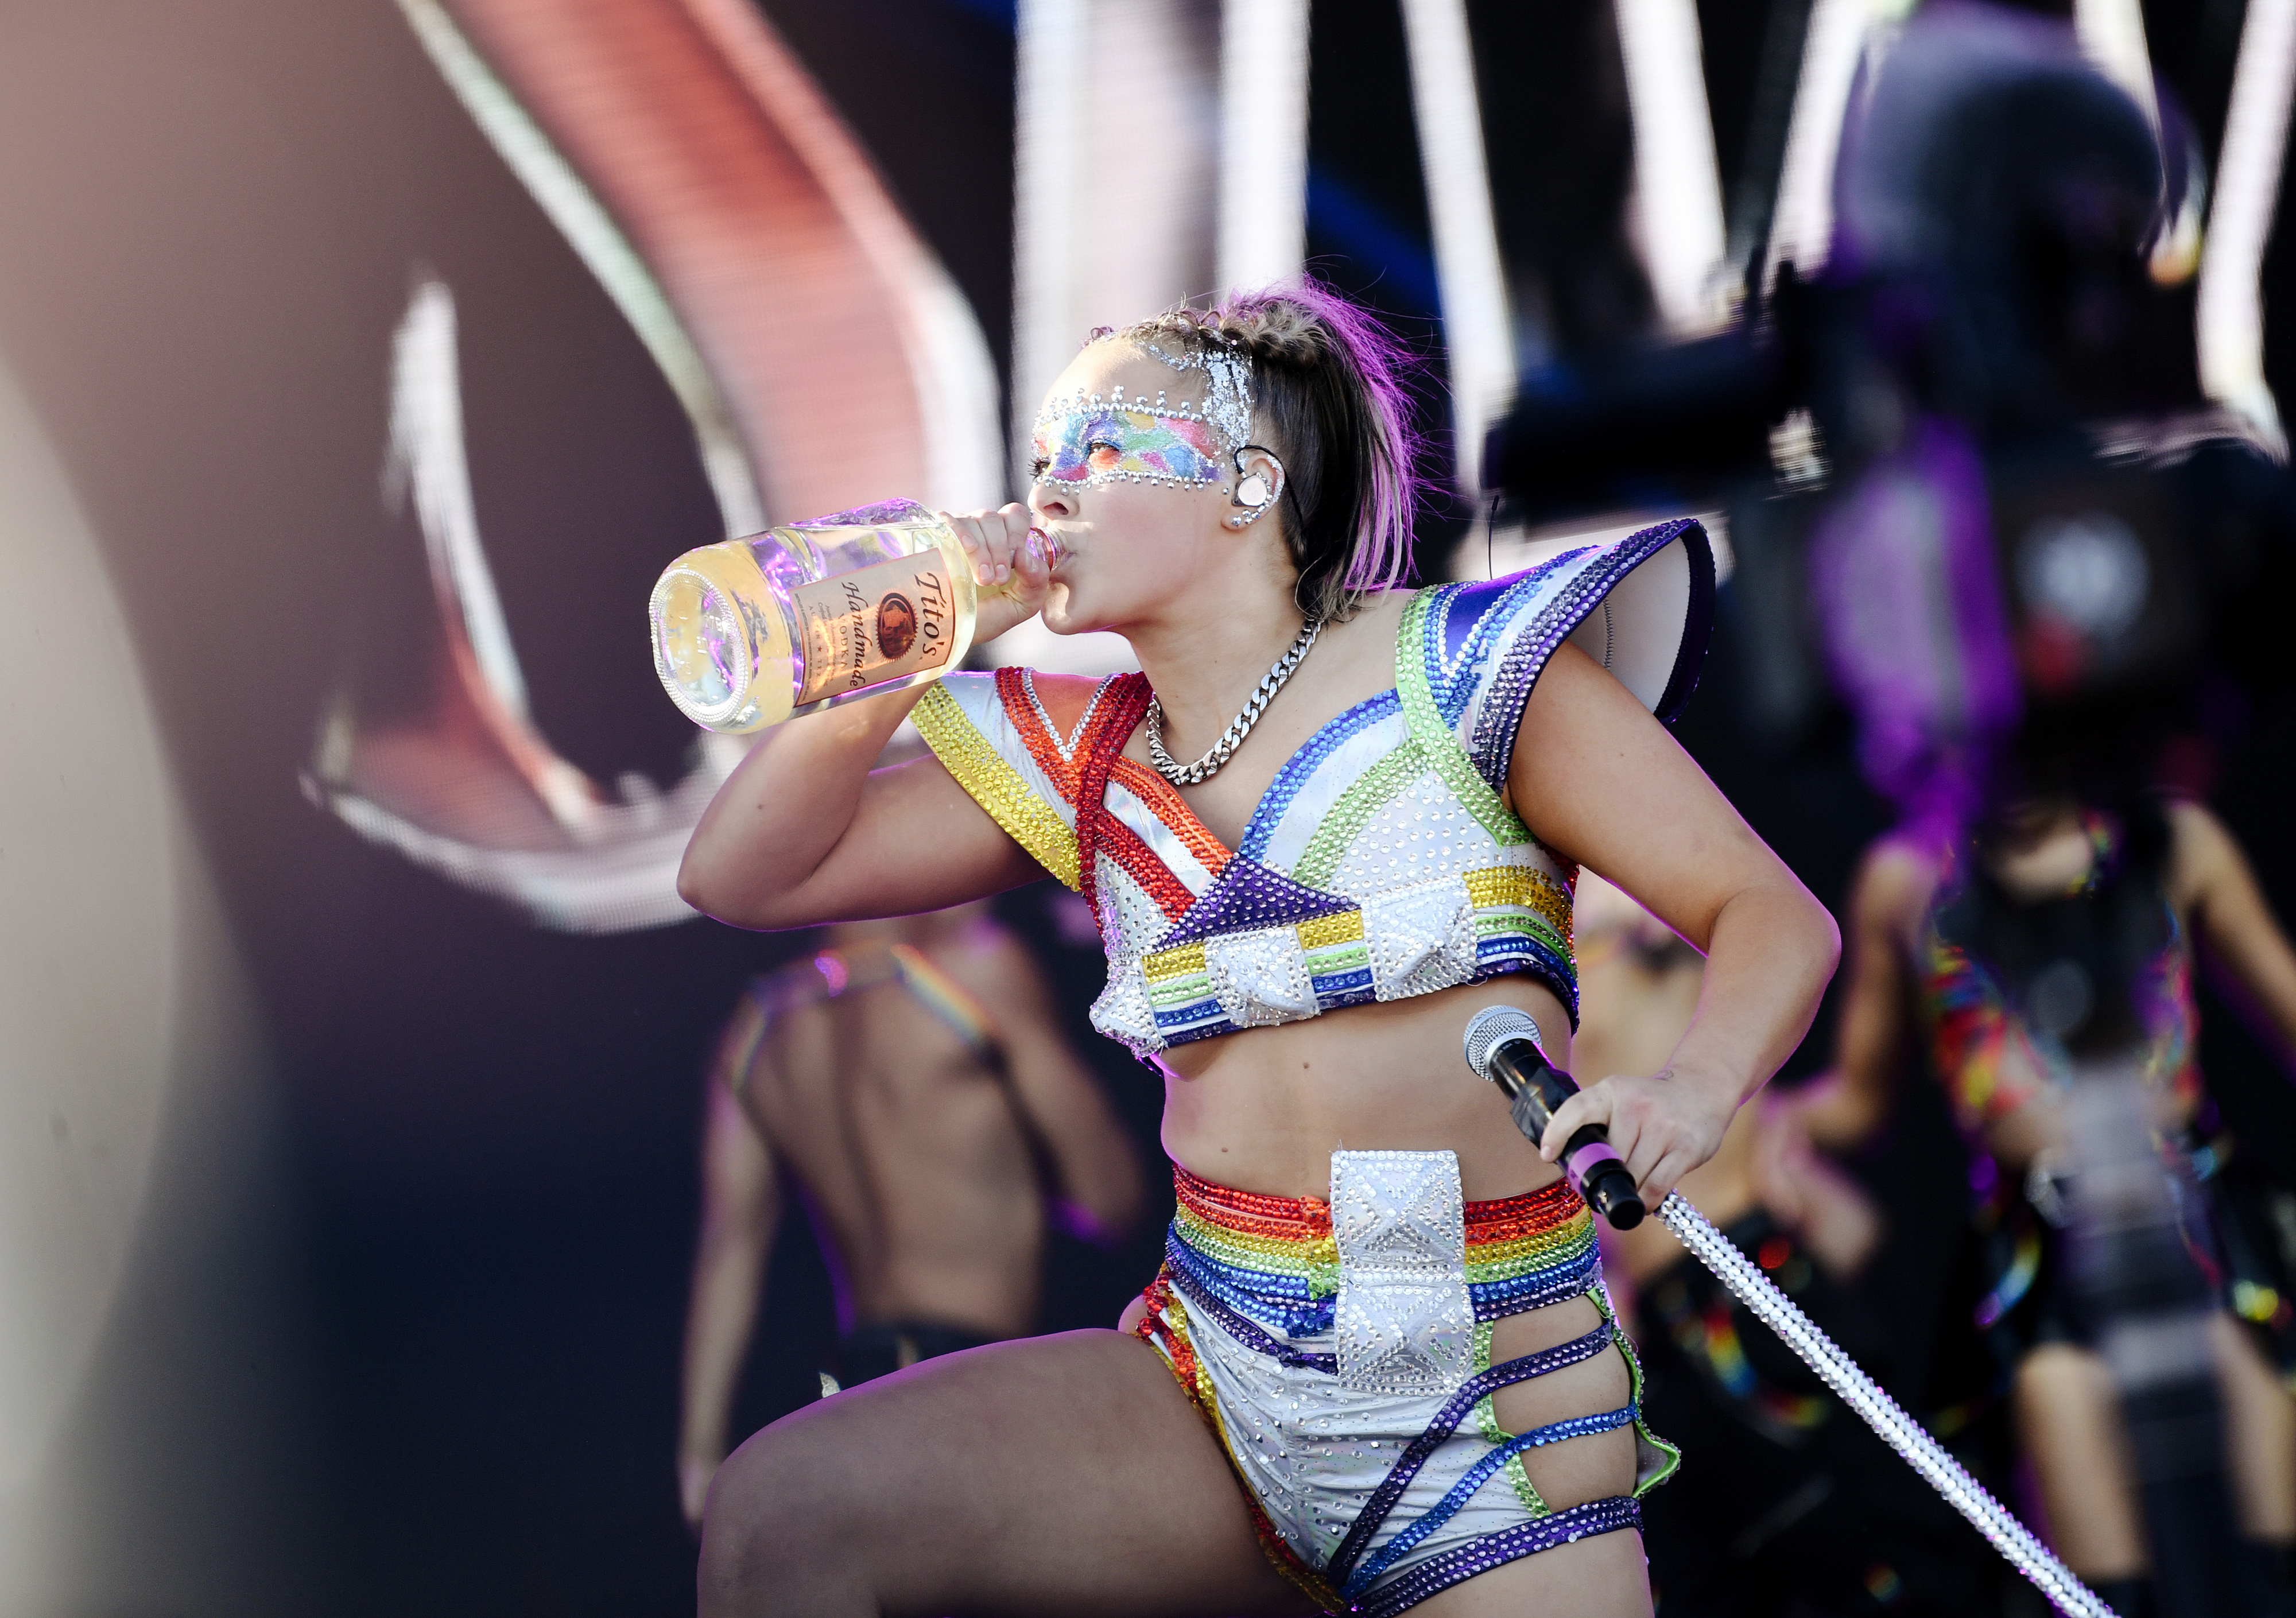 Jojo Siwa performs on stage, wearing an elaborate outfit with geometric shapes and sparkles, while drinking from a large bottle